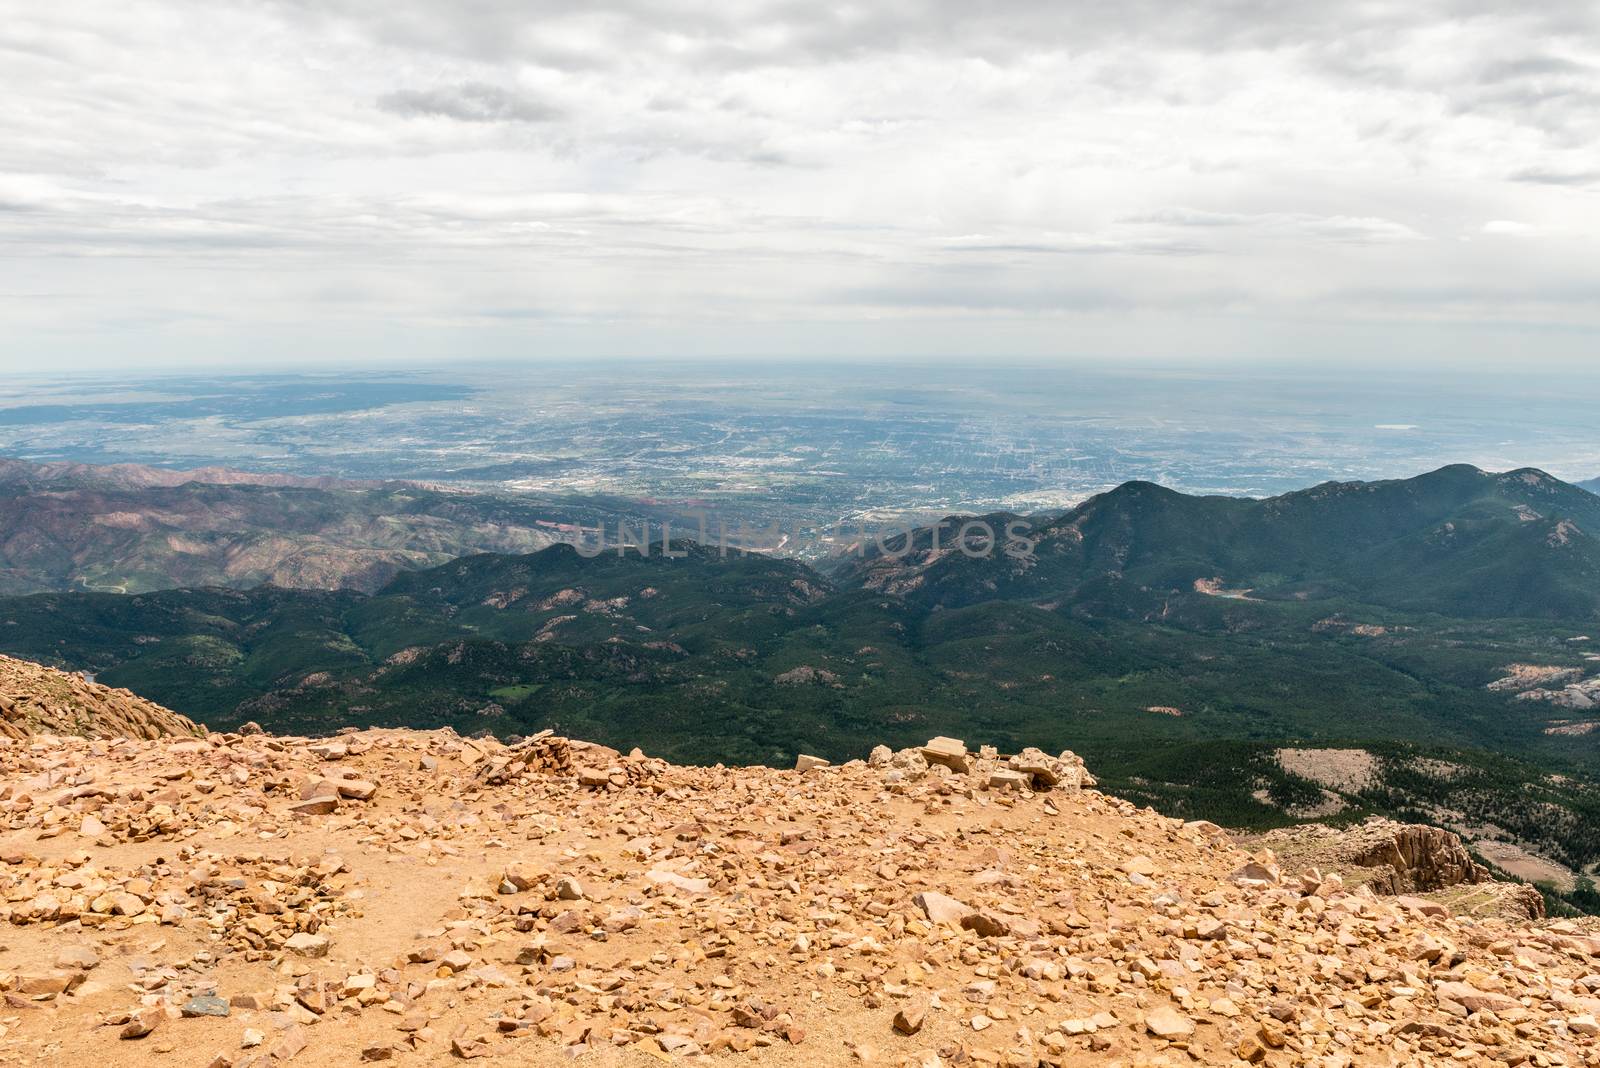 View from the top of Pikes Peak in Pike National Forest, Colorado by Njean